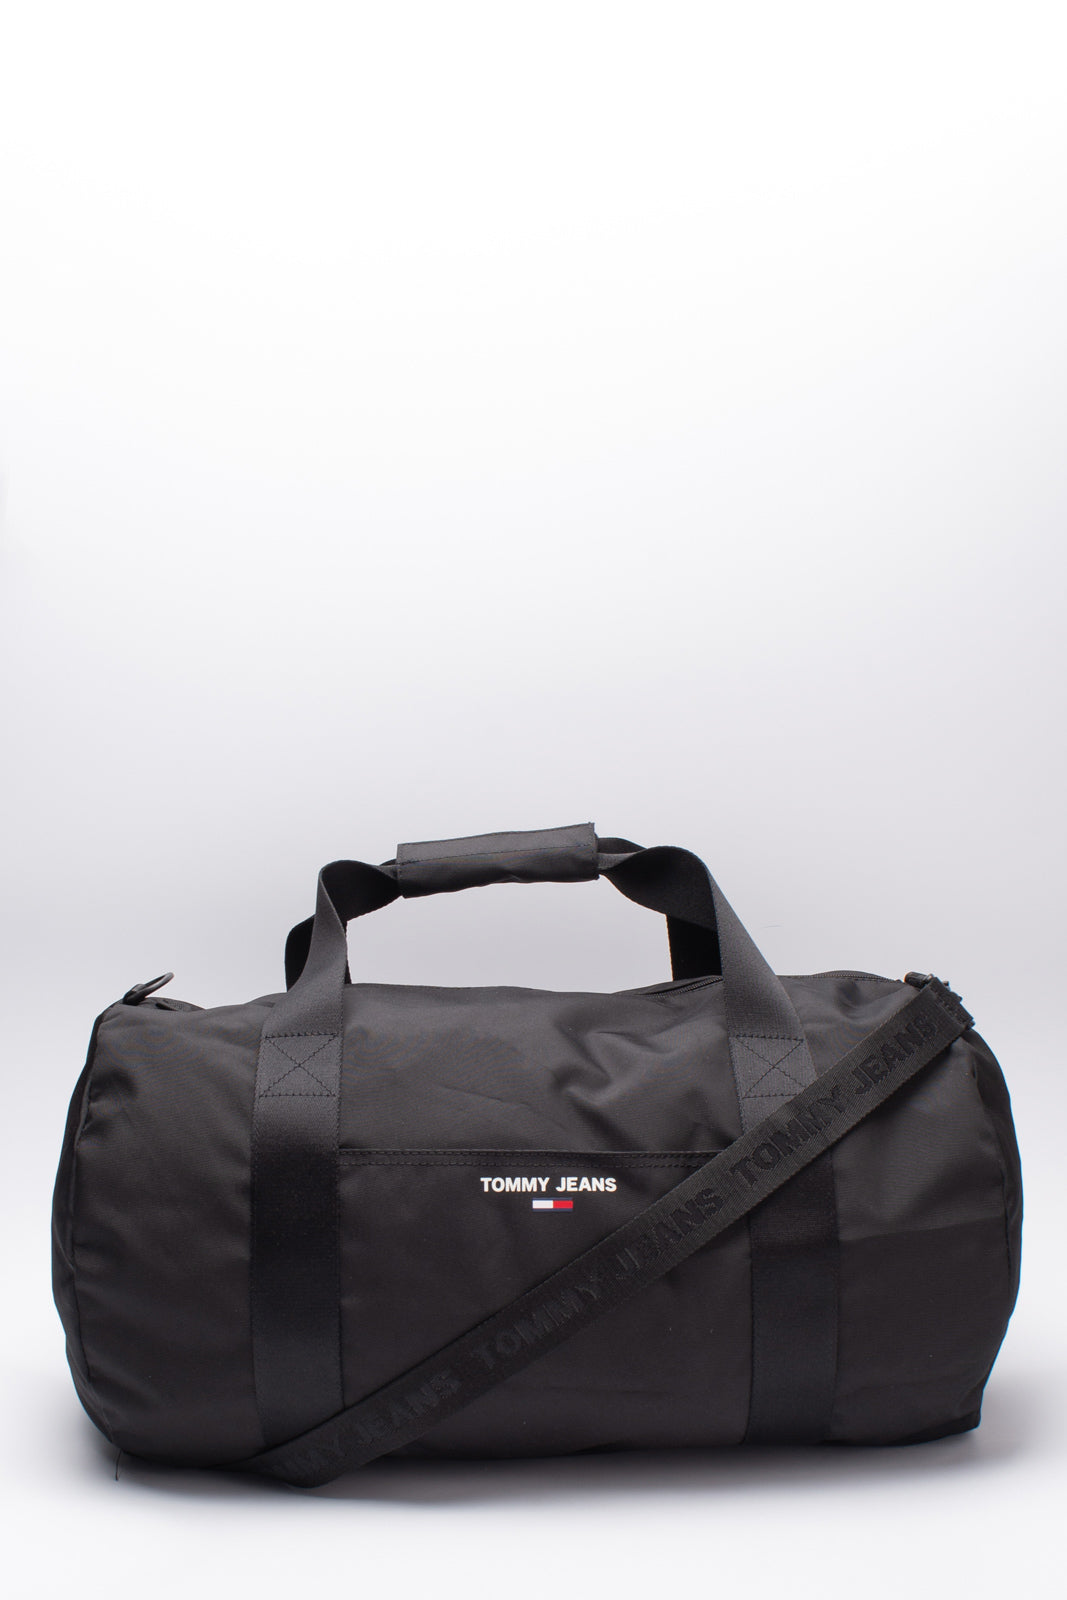 TOMMY JEANS ESSENTIAL Barrel Duffle Bag Large Recycled Detachable Strap Zipped gallery main photo